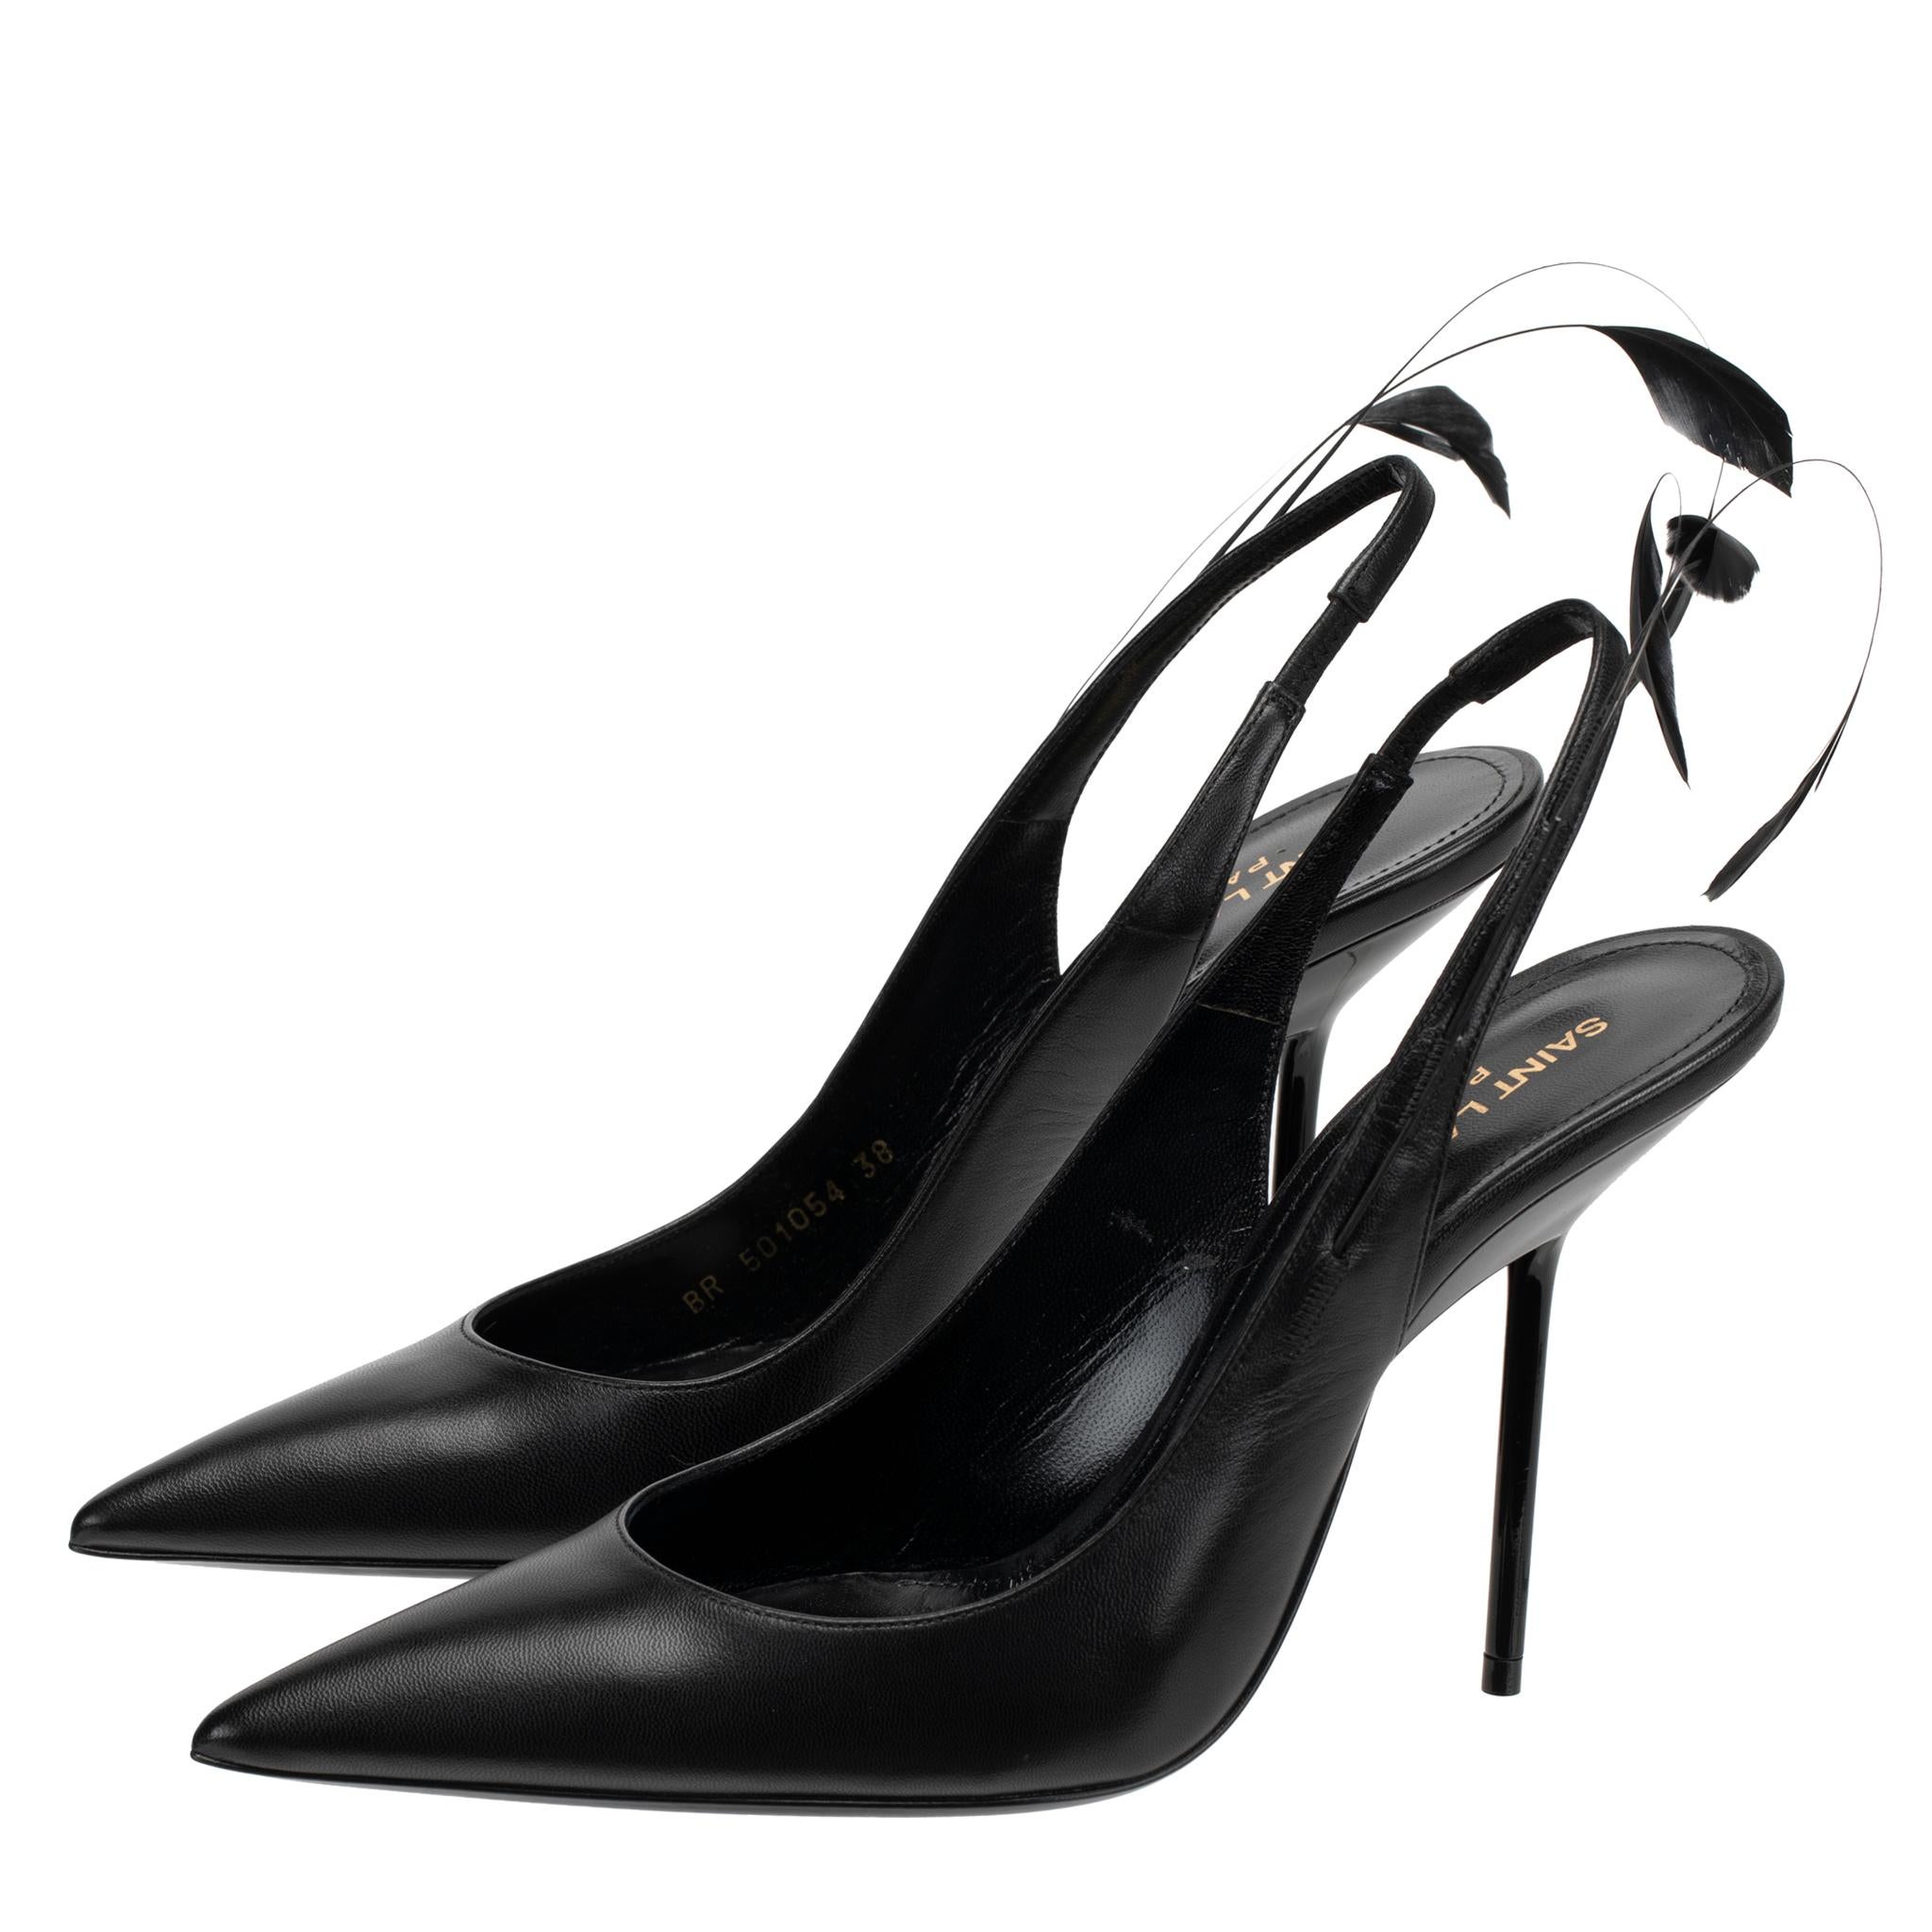 These luxurious Yves Saint Laurent Slingback Pumps feature smooth black leather with an eye-catching feather detail, perfect for creating an alluring, sophisticated look. The high-end leather material ensures long-term wear while the feather detail